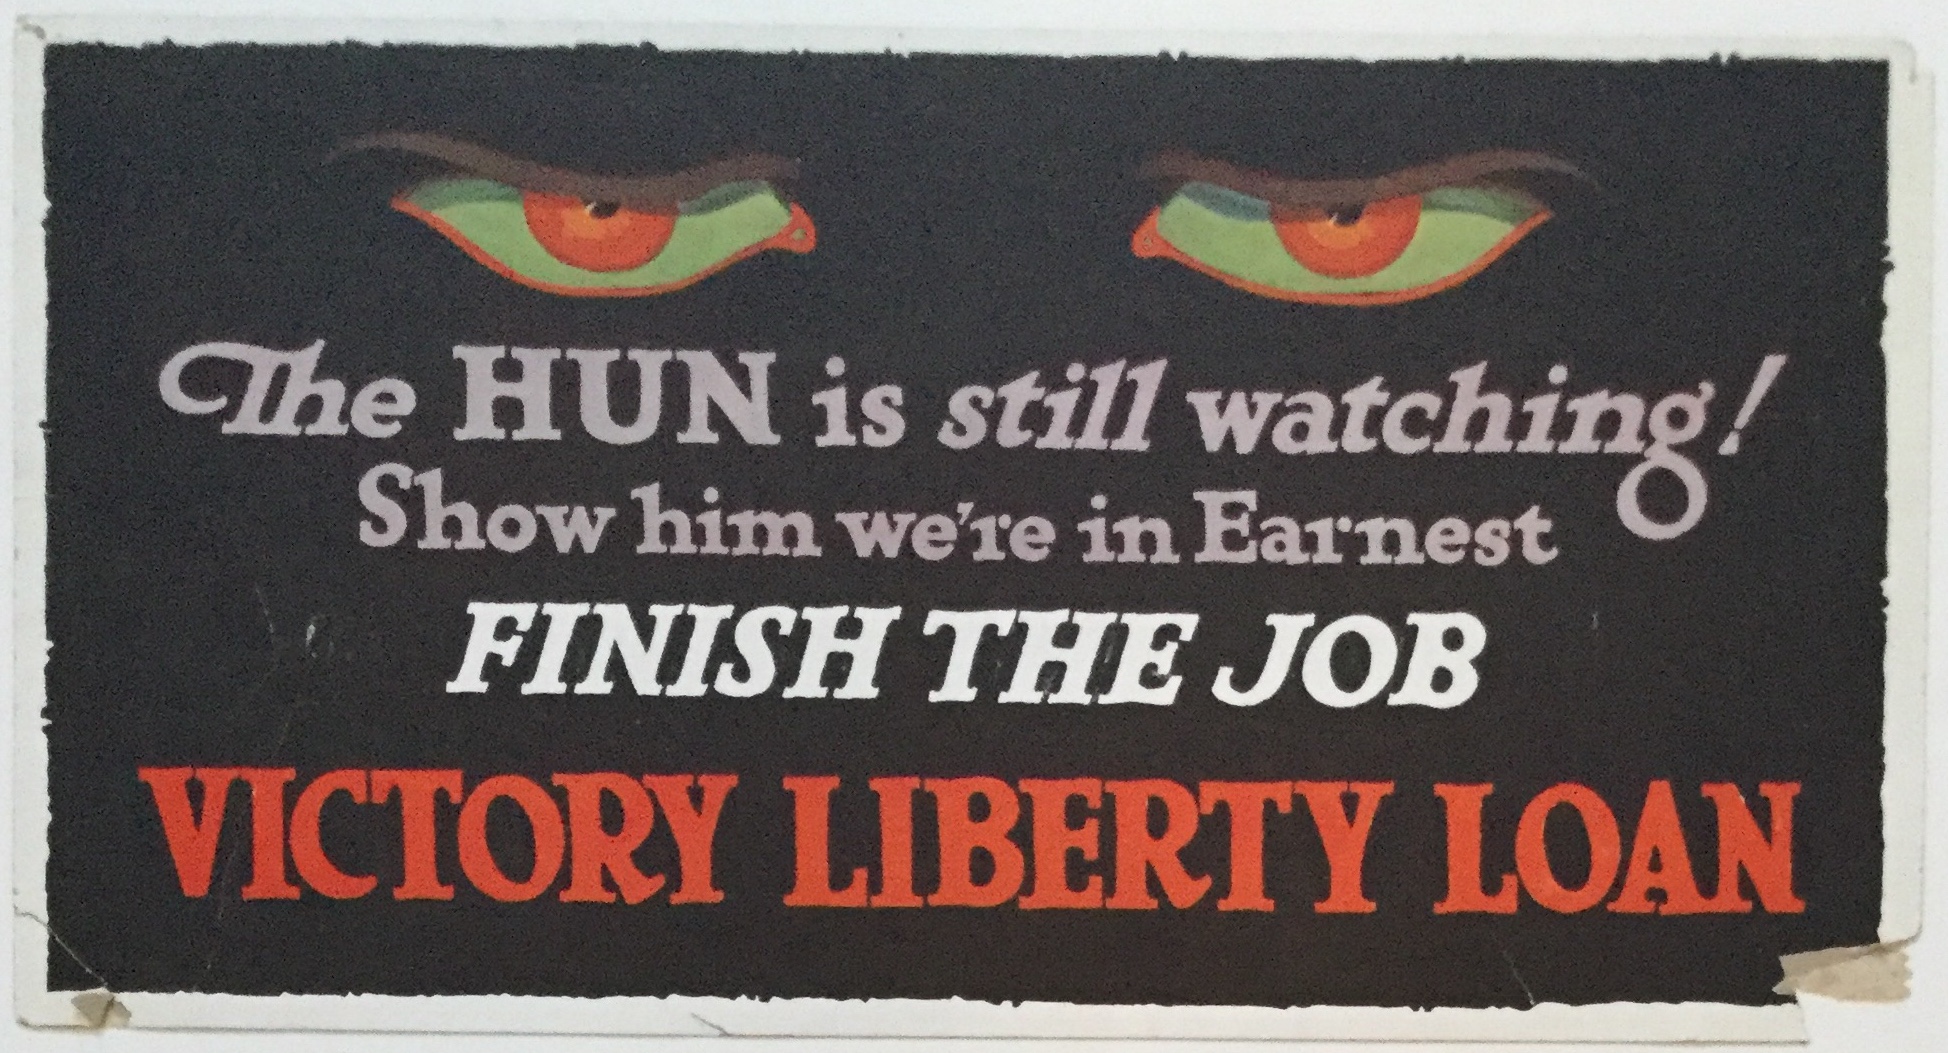 J135	THE HUN IS STILL WATCHING! SHOW HIM WE'RE IN EARNEST - FINISH THE JOB